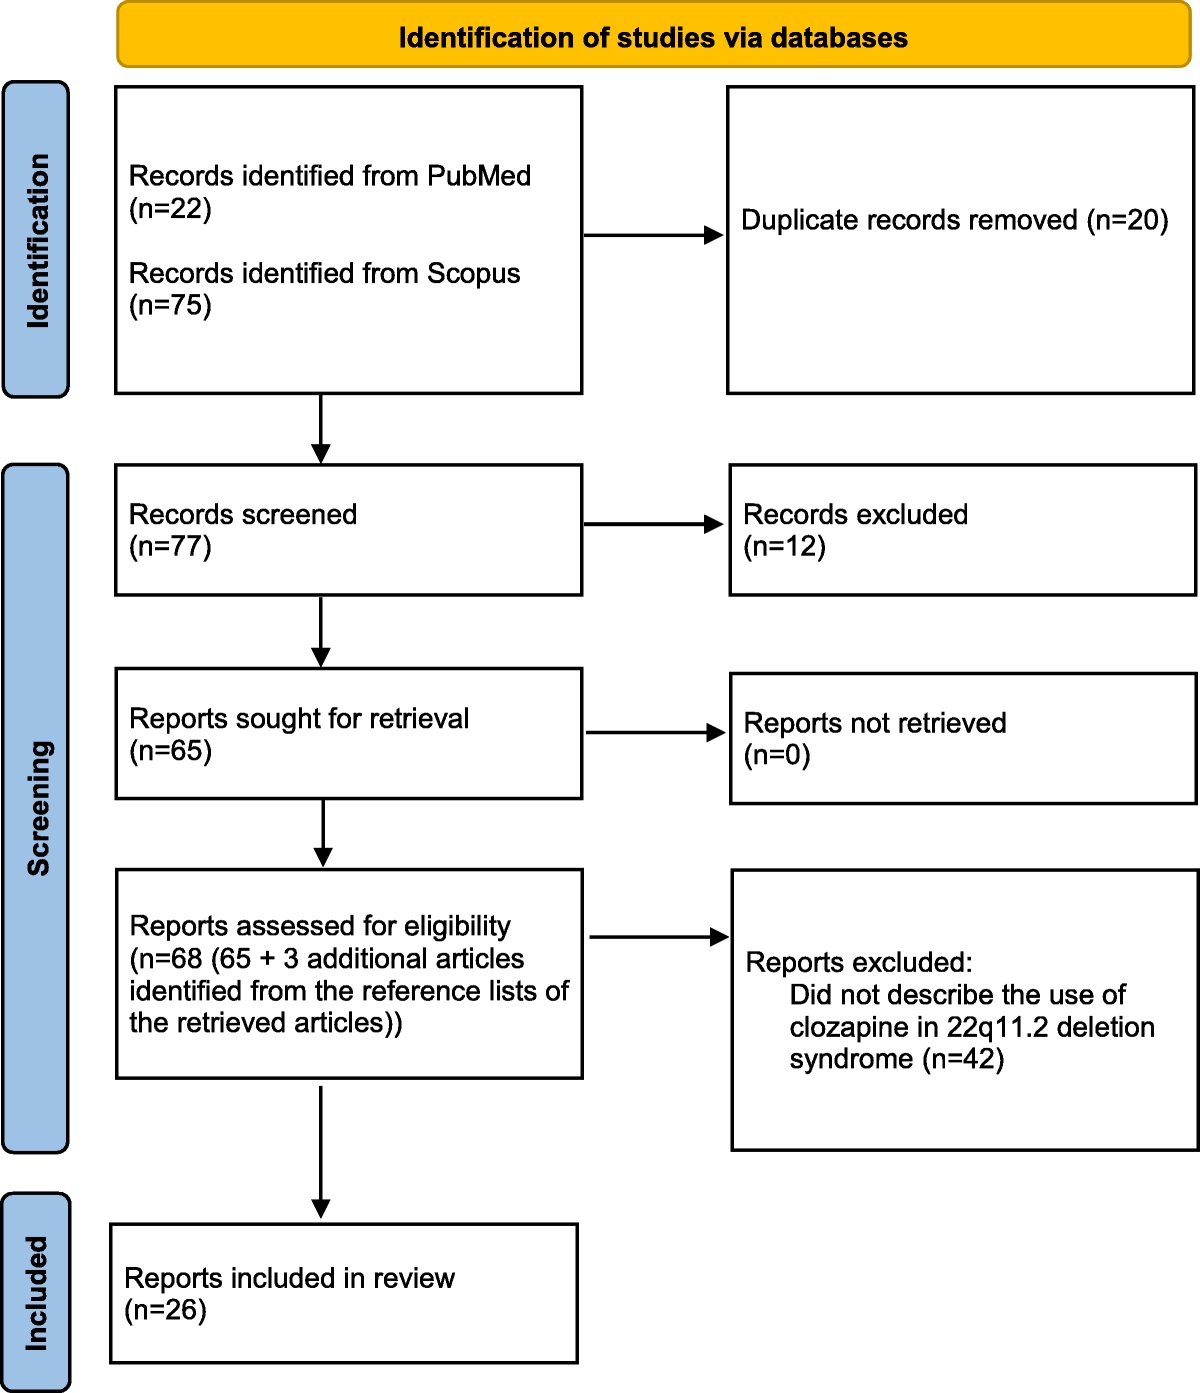 Clozapine Use in 22q11.2 Deletion Syndrome: A Systematic Review of the Literature